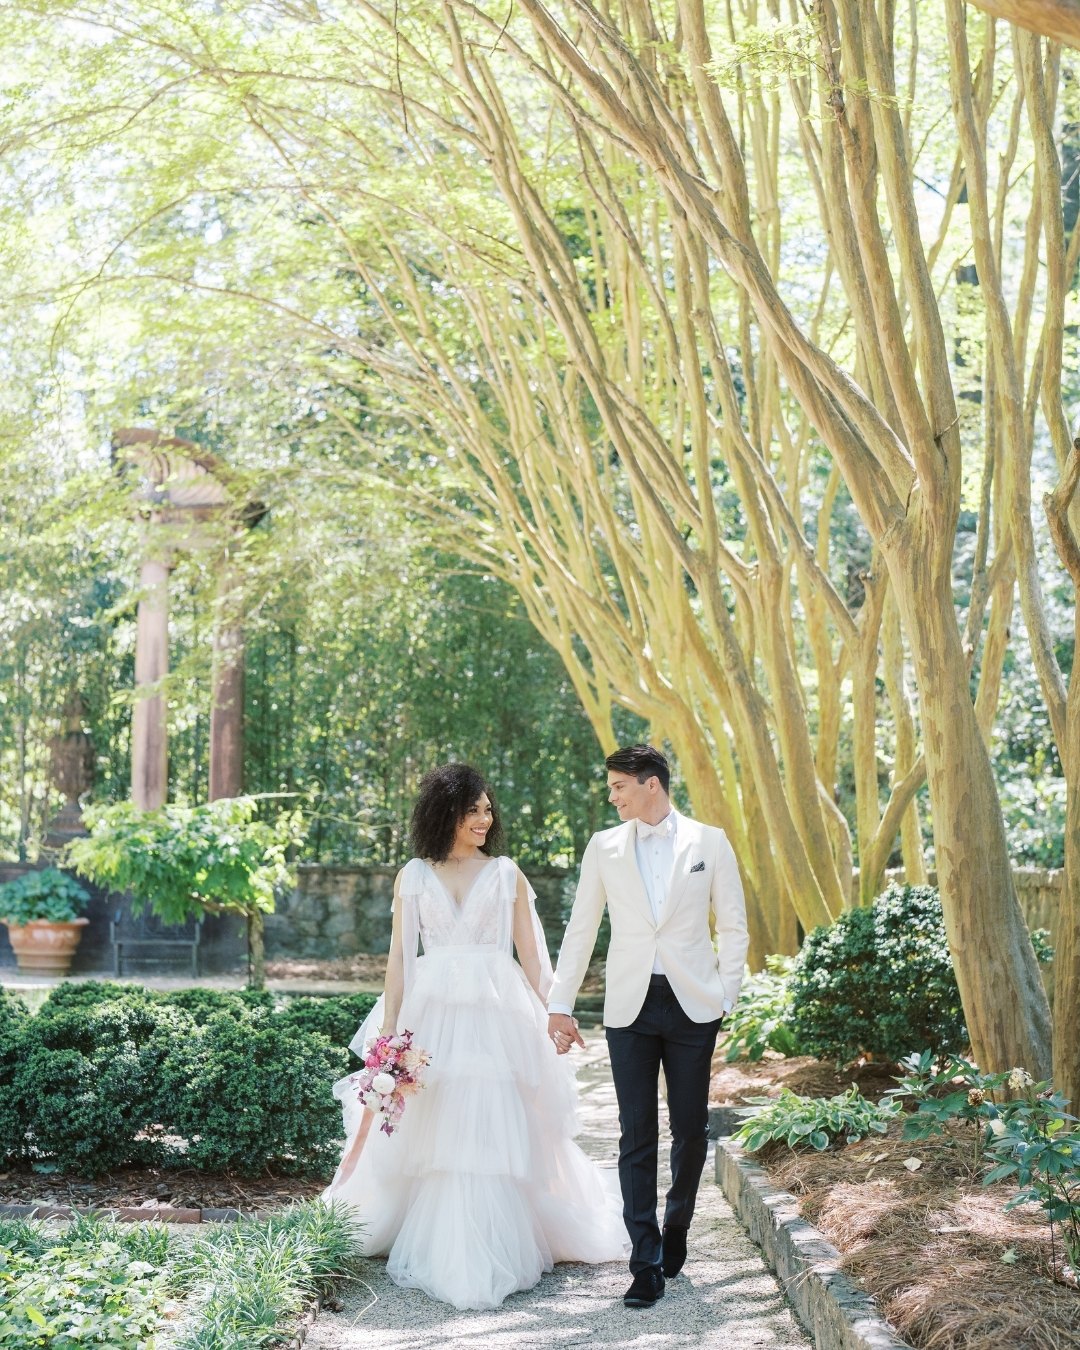 Bride and groom strolling in a garden hand in hand